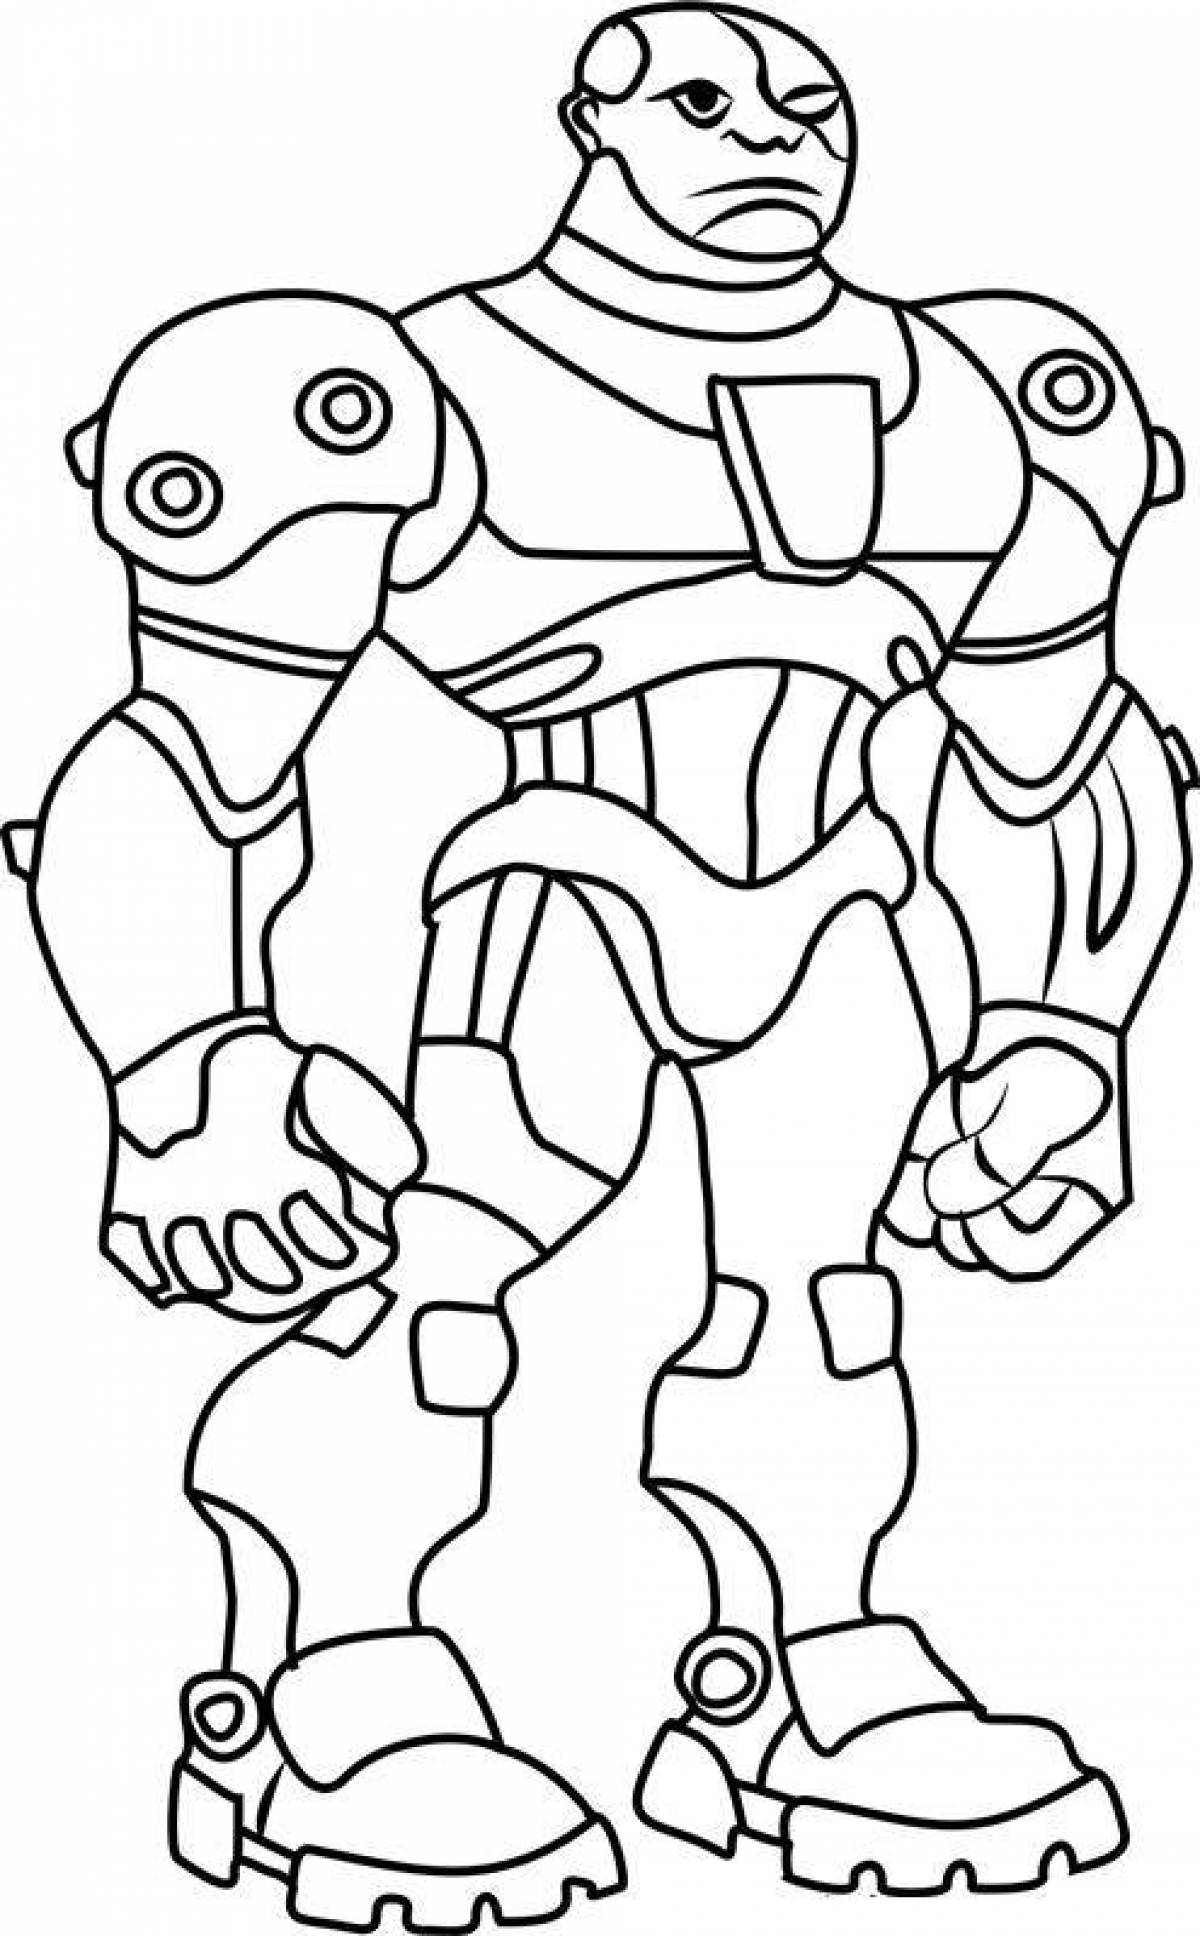 Coloring page graceful cyborg